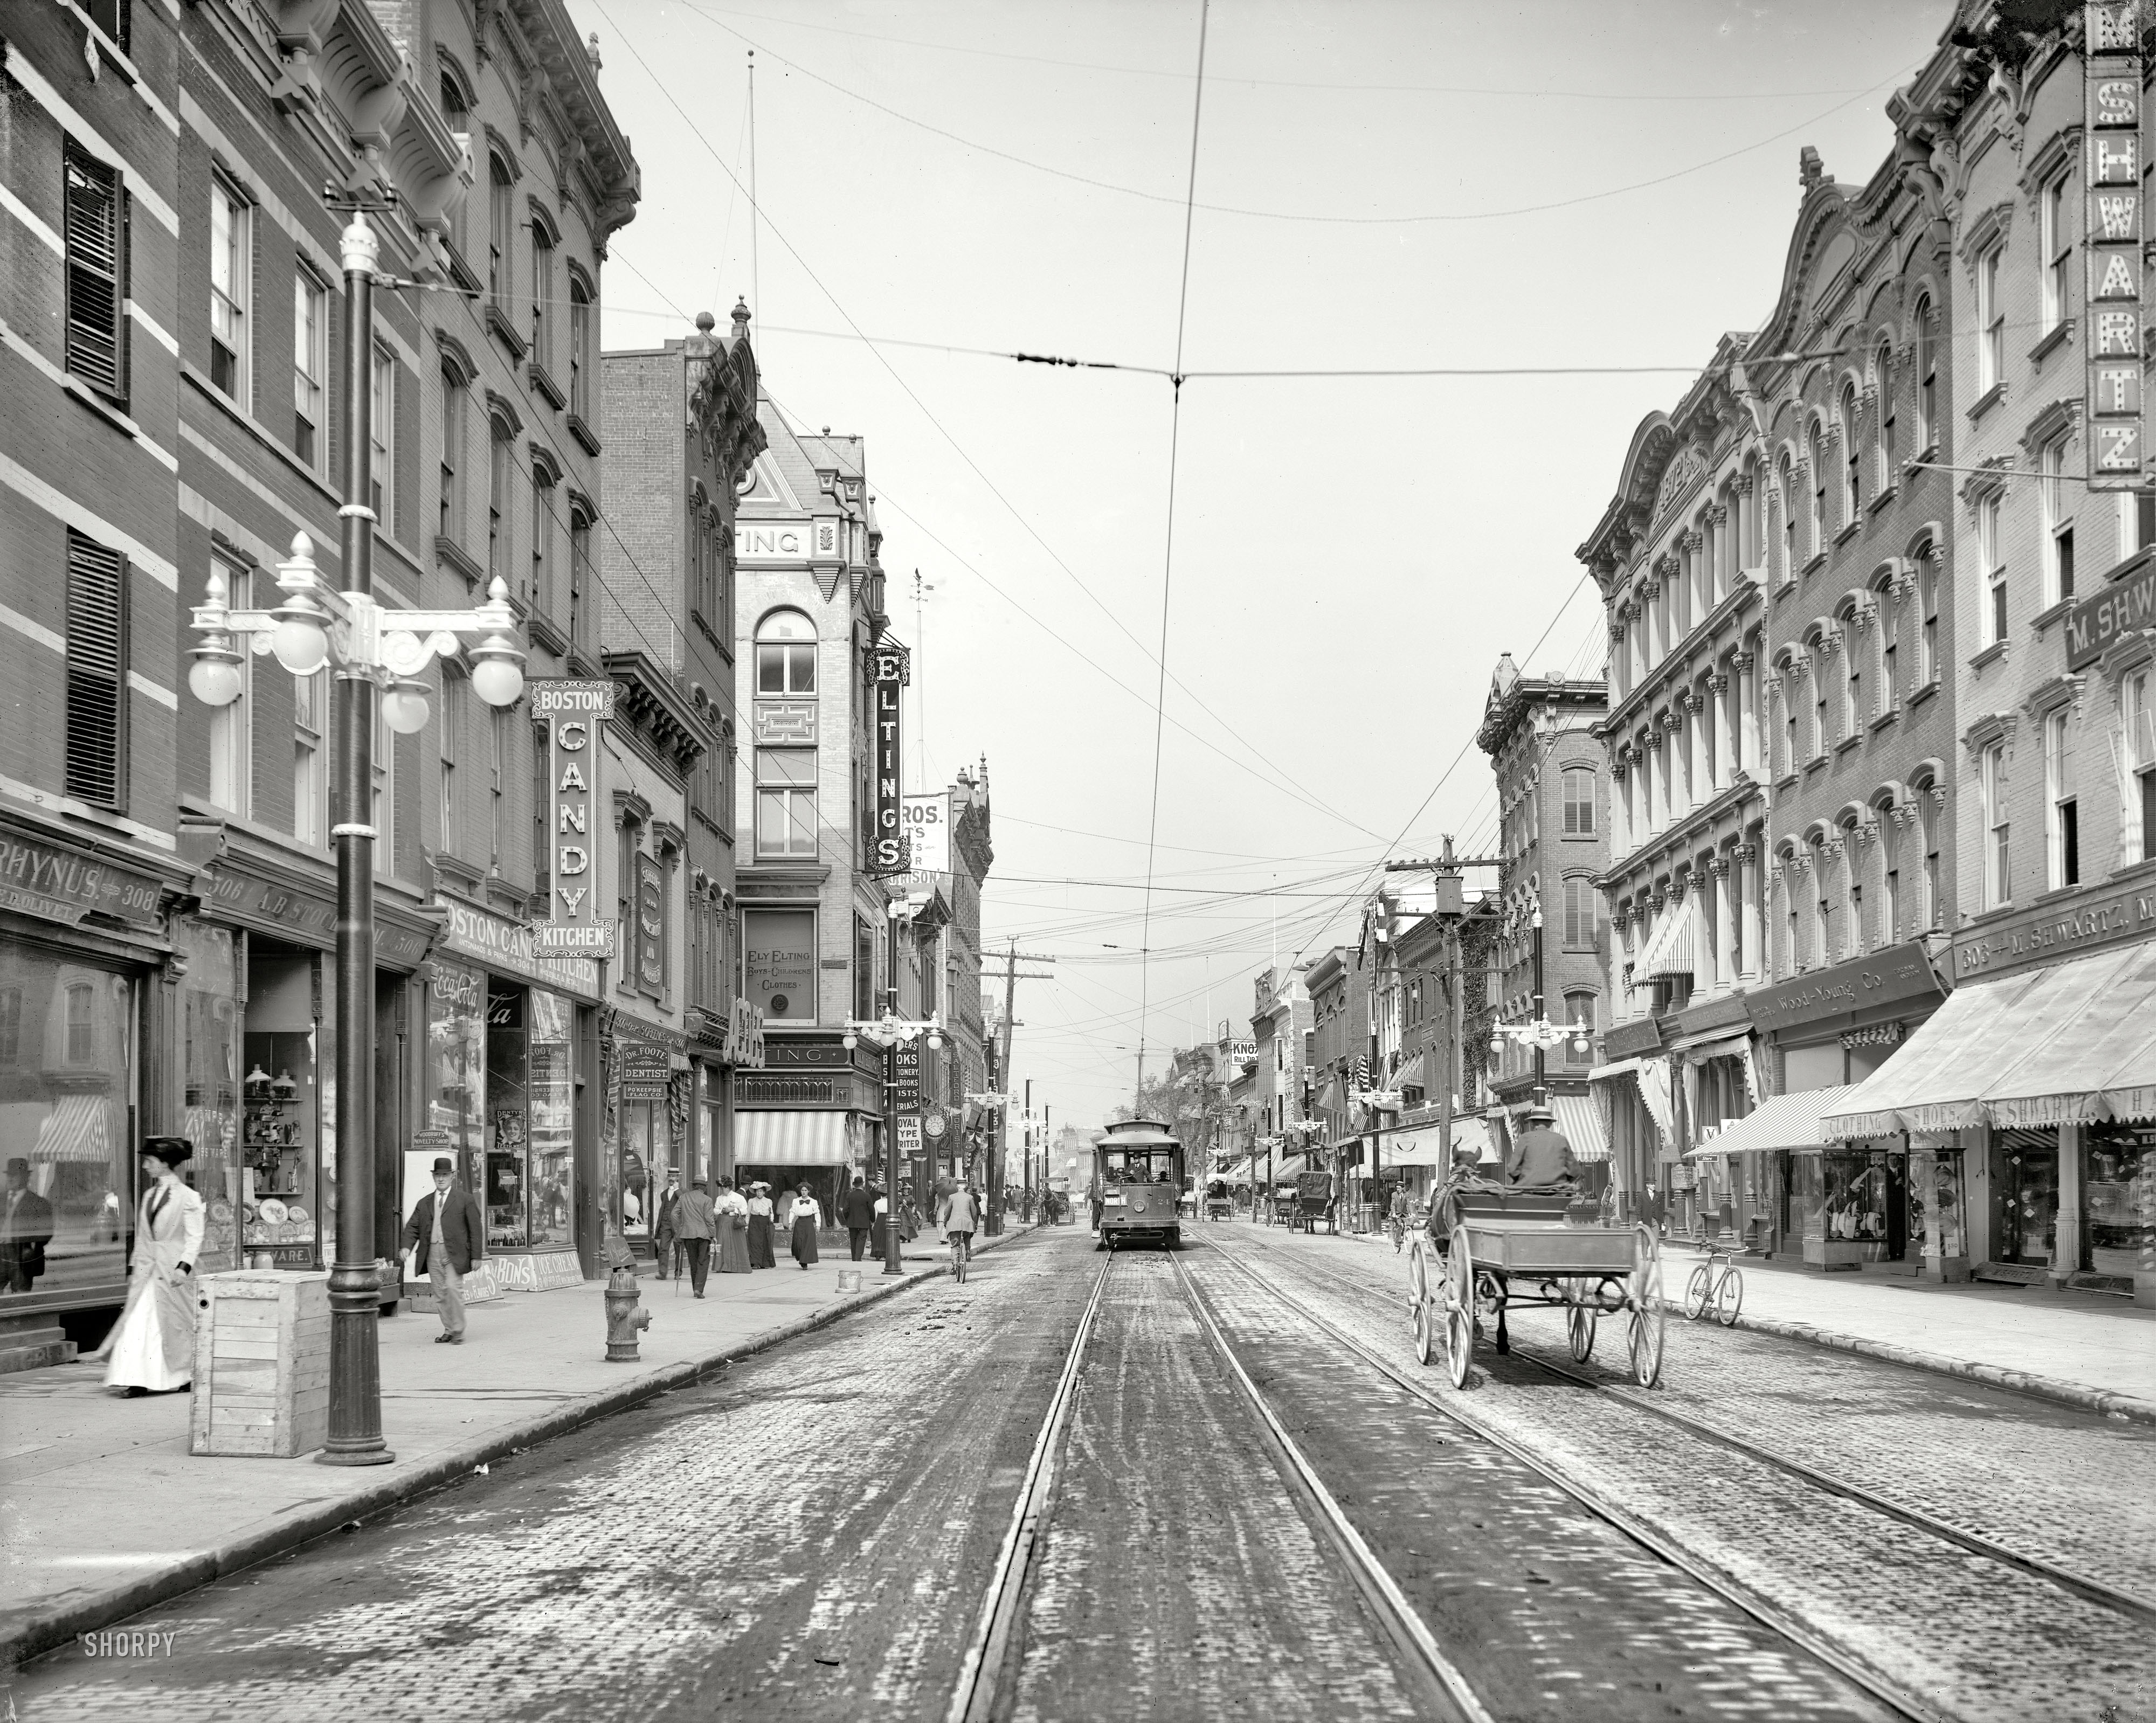 Poughkeepsie, New York, circa 1912. "Main Street looking toward Liberty." A few years after our previous visit, things have been spruced up a bit. 8x10 inch dry plate glass negative, Detroit Publishing Company. View full size.